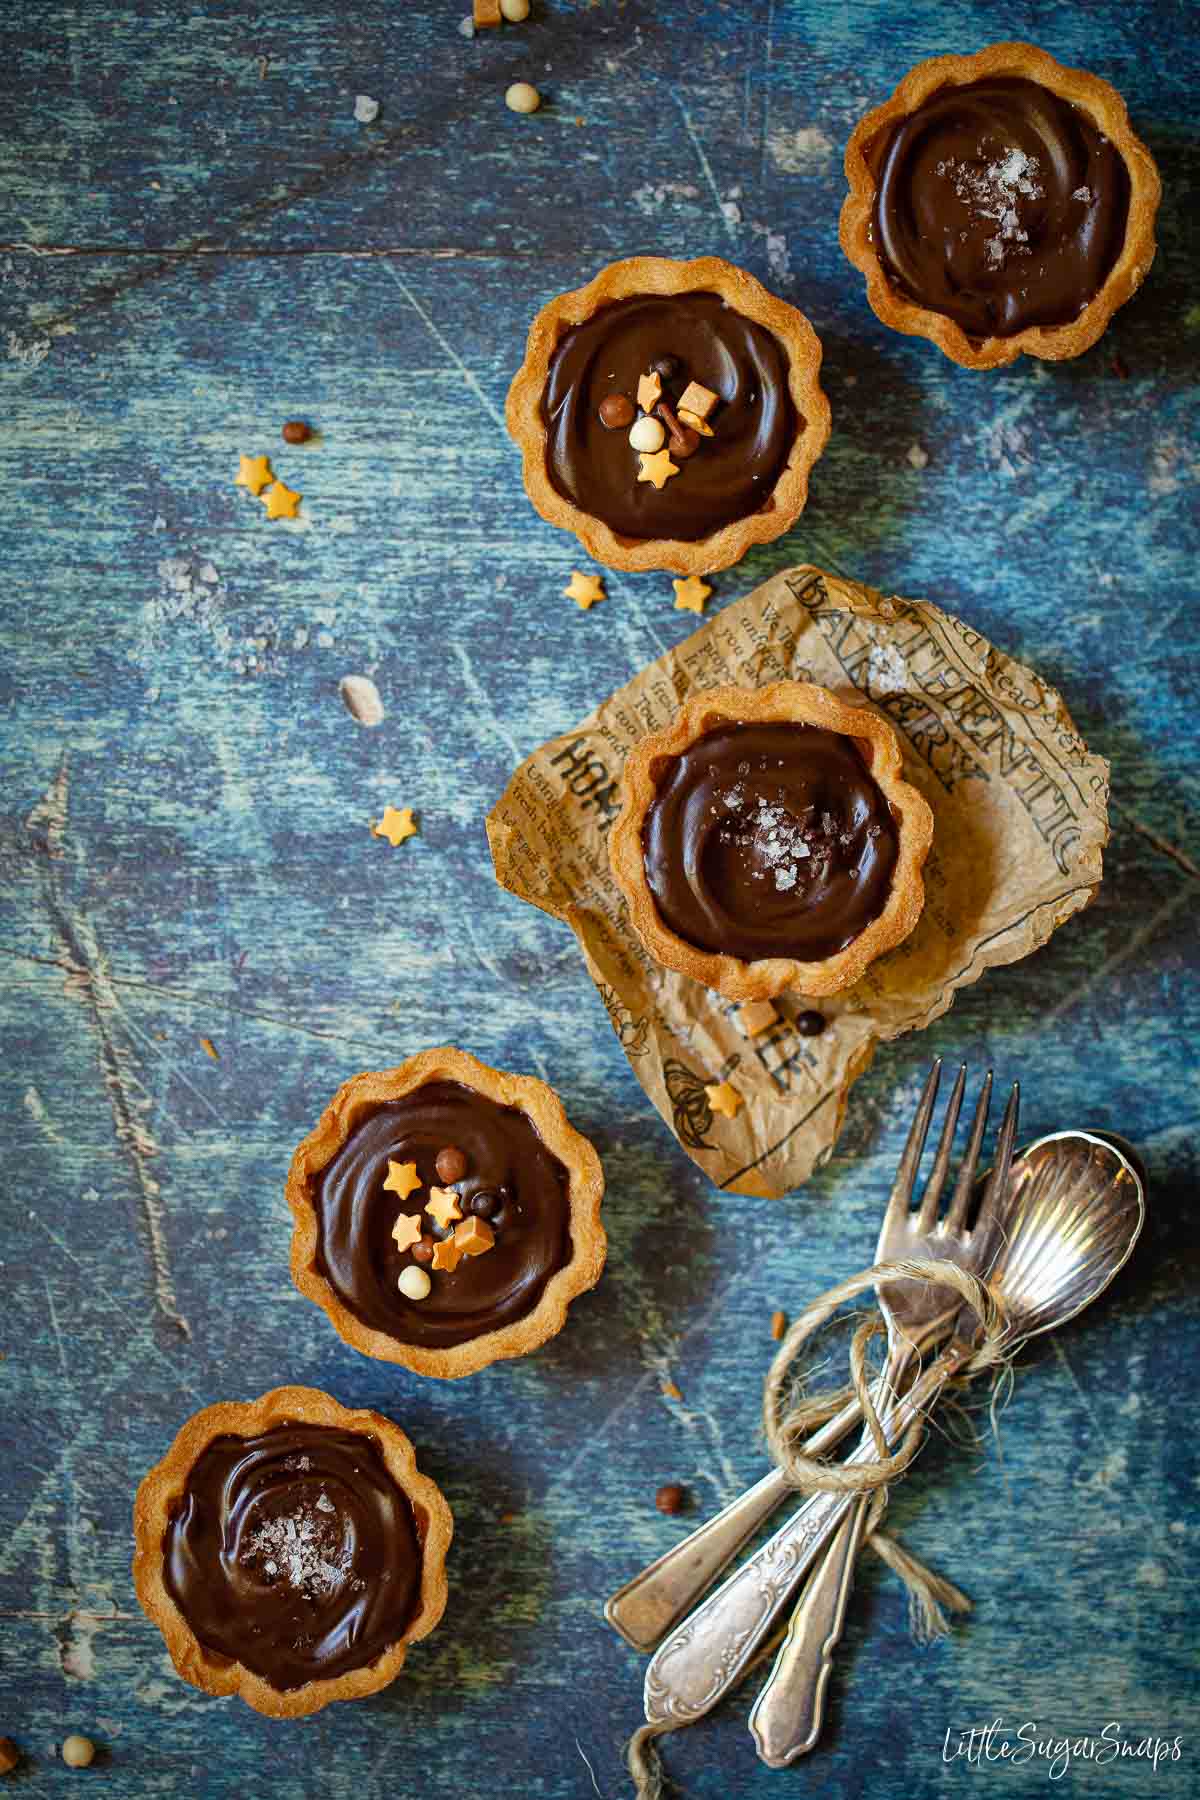 Five chocolate caramel tarts topped with chocolate ganache, sprinkles and sea salt.